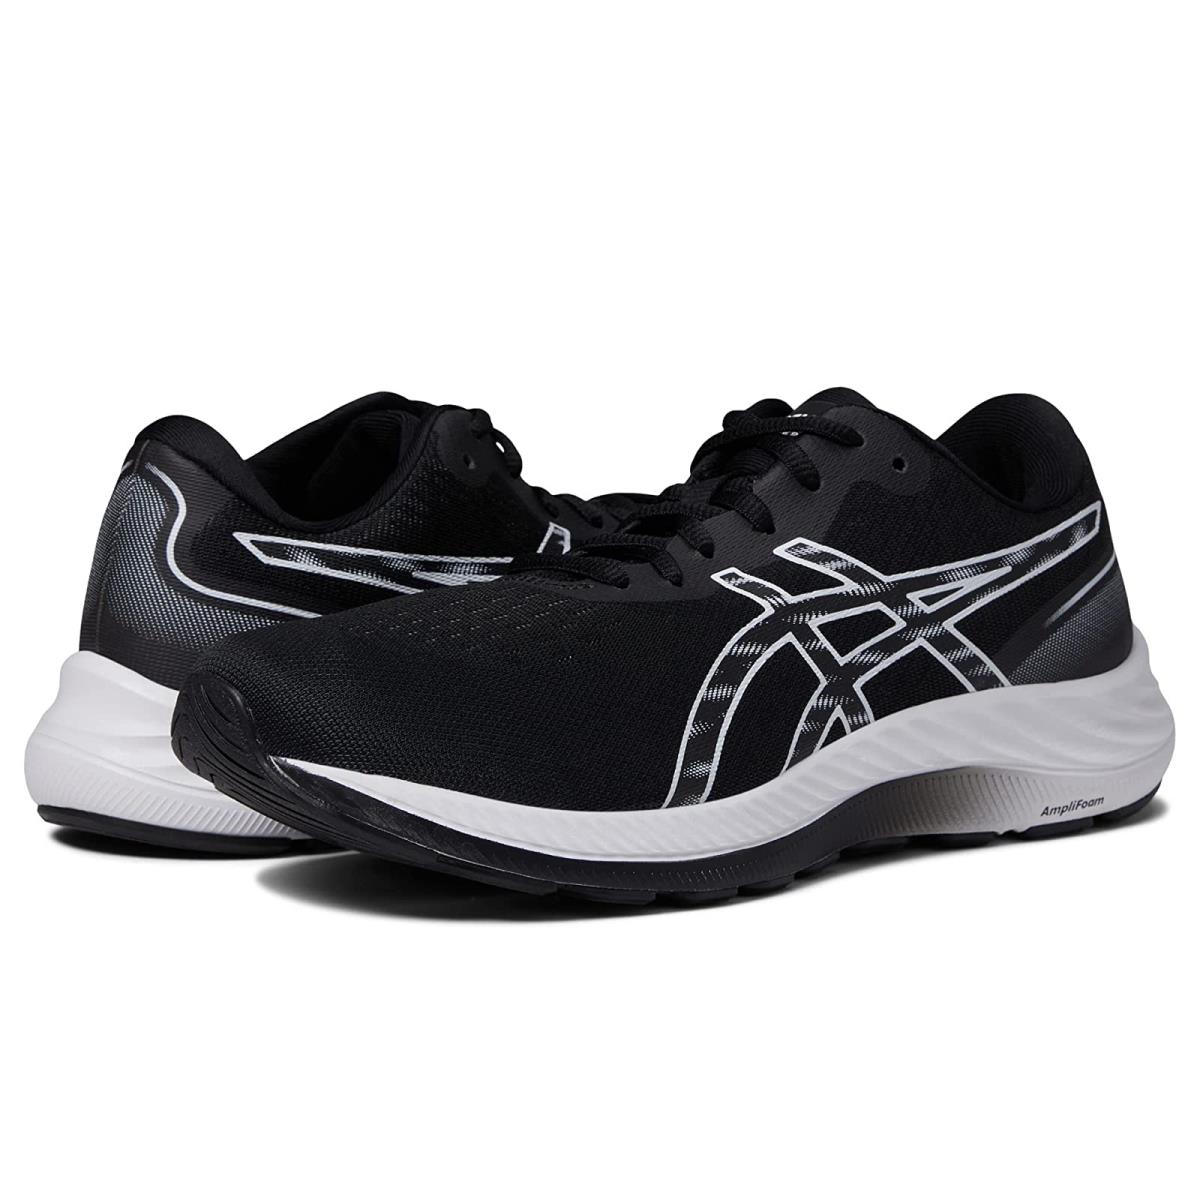 Woman`s Sneakers Athletic Shoes Asics Gel-excite 9 Black/White